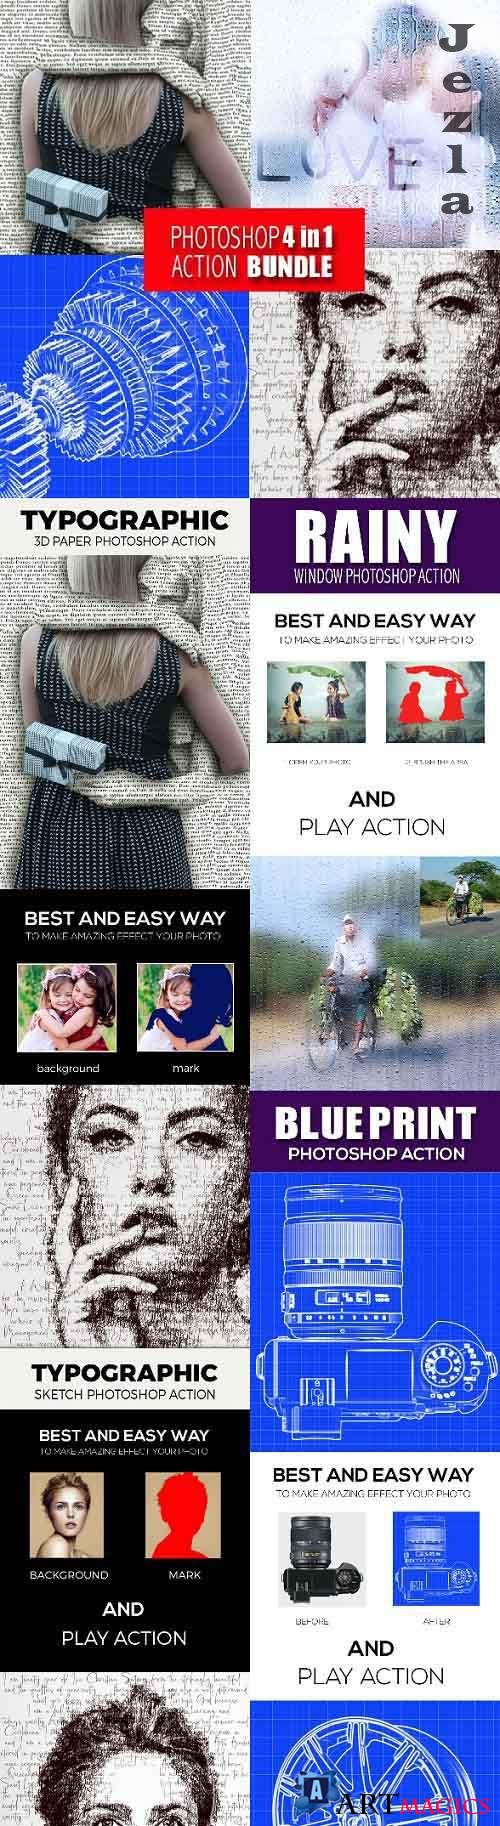 GraphicRiver - Photoshop 4in1 Actions Bundle V 7 28586206